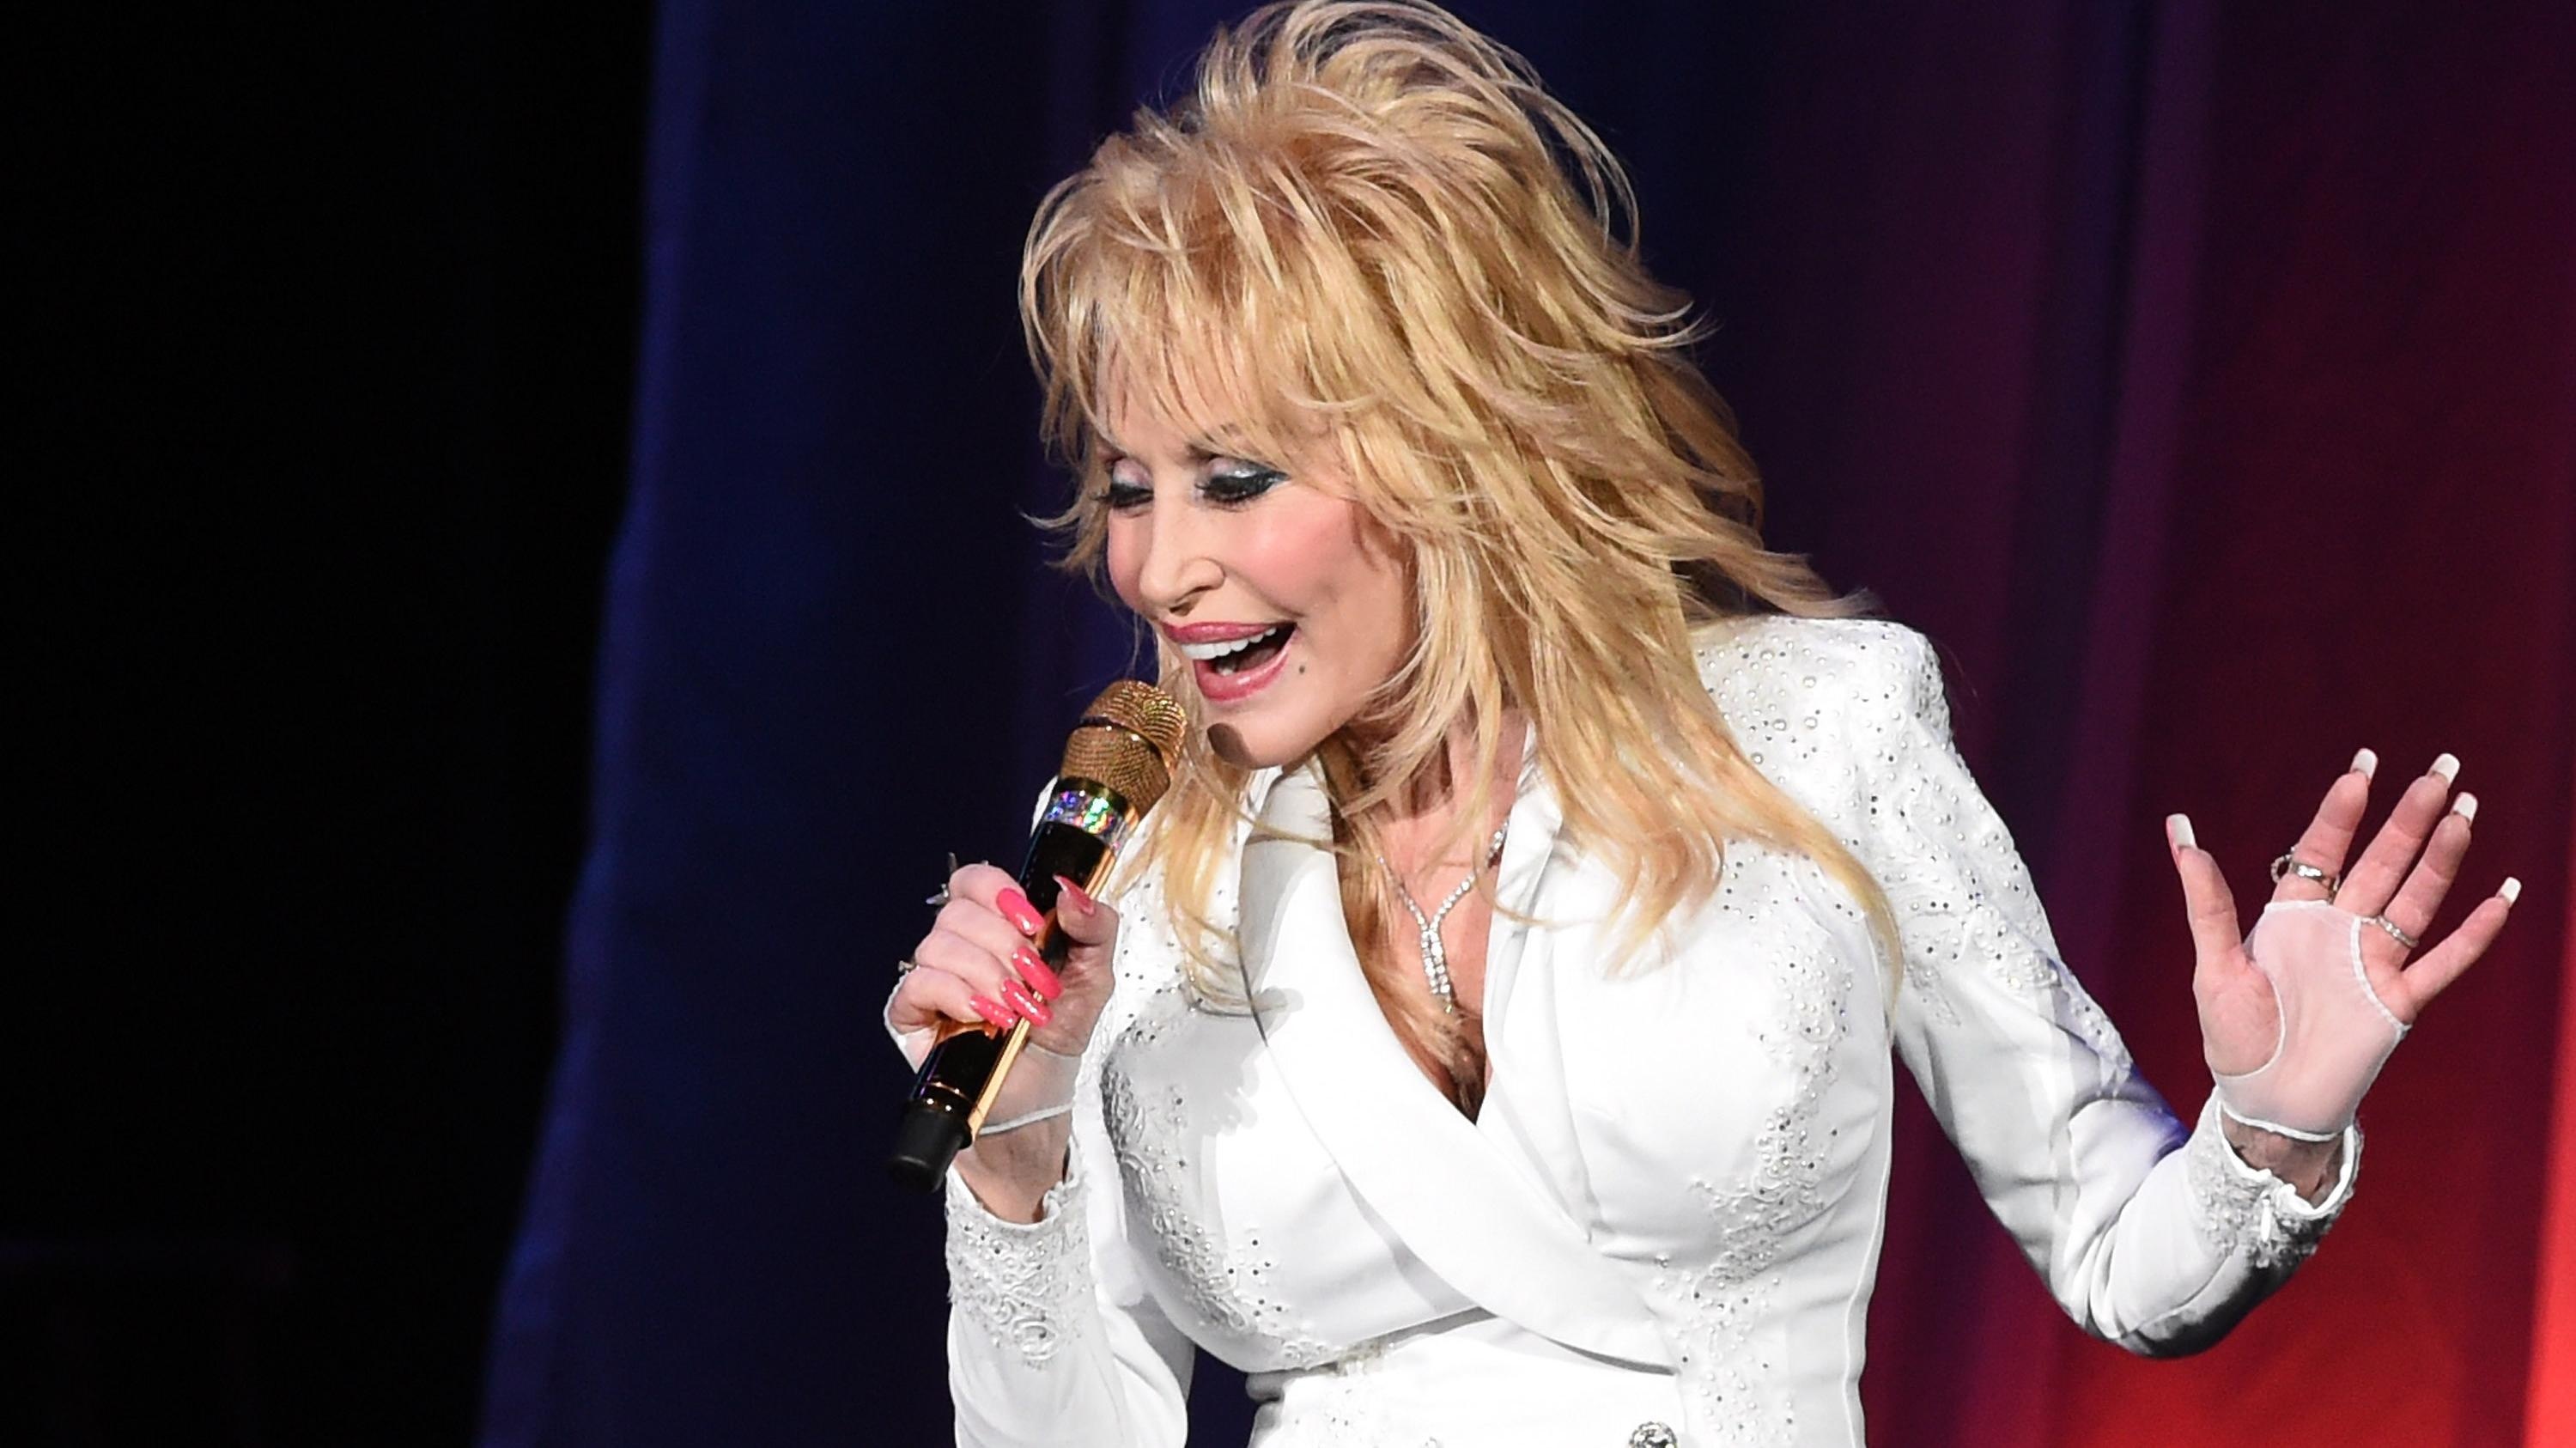 Dolly Parton wallpapers, Dolly Parton posted by ethan simpson, Music, Celebrity, 3000x1690 HD Desktop